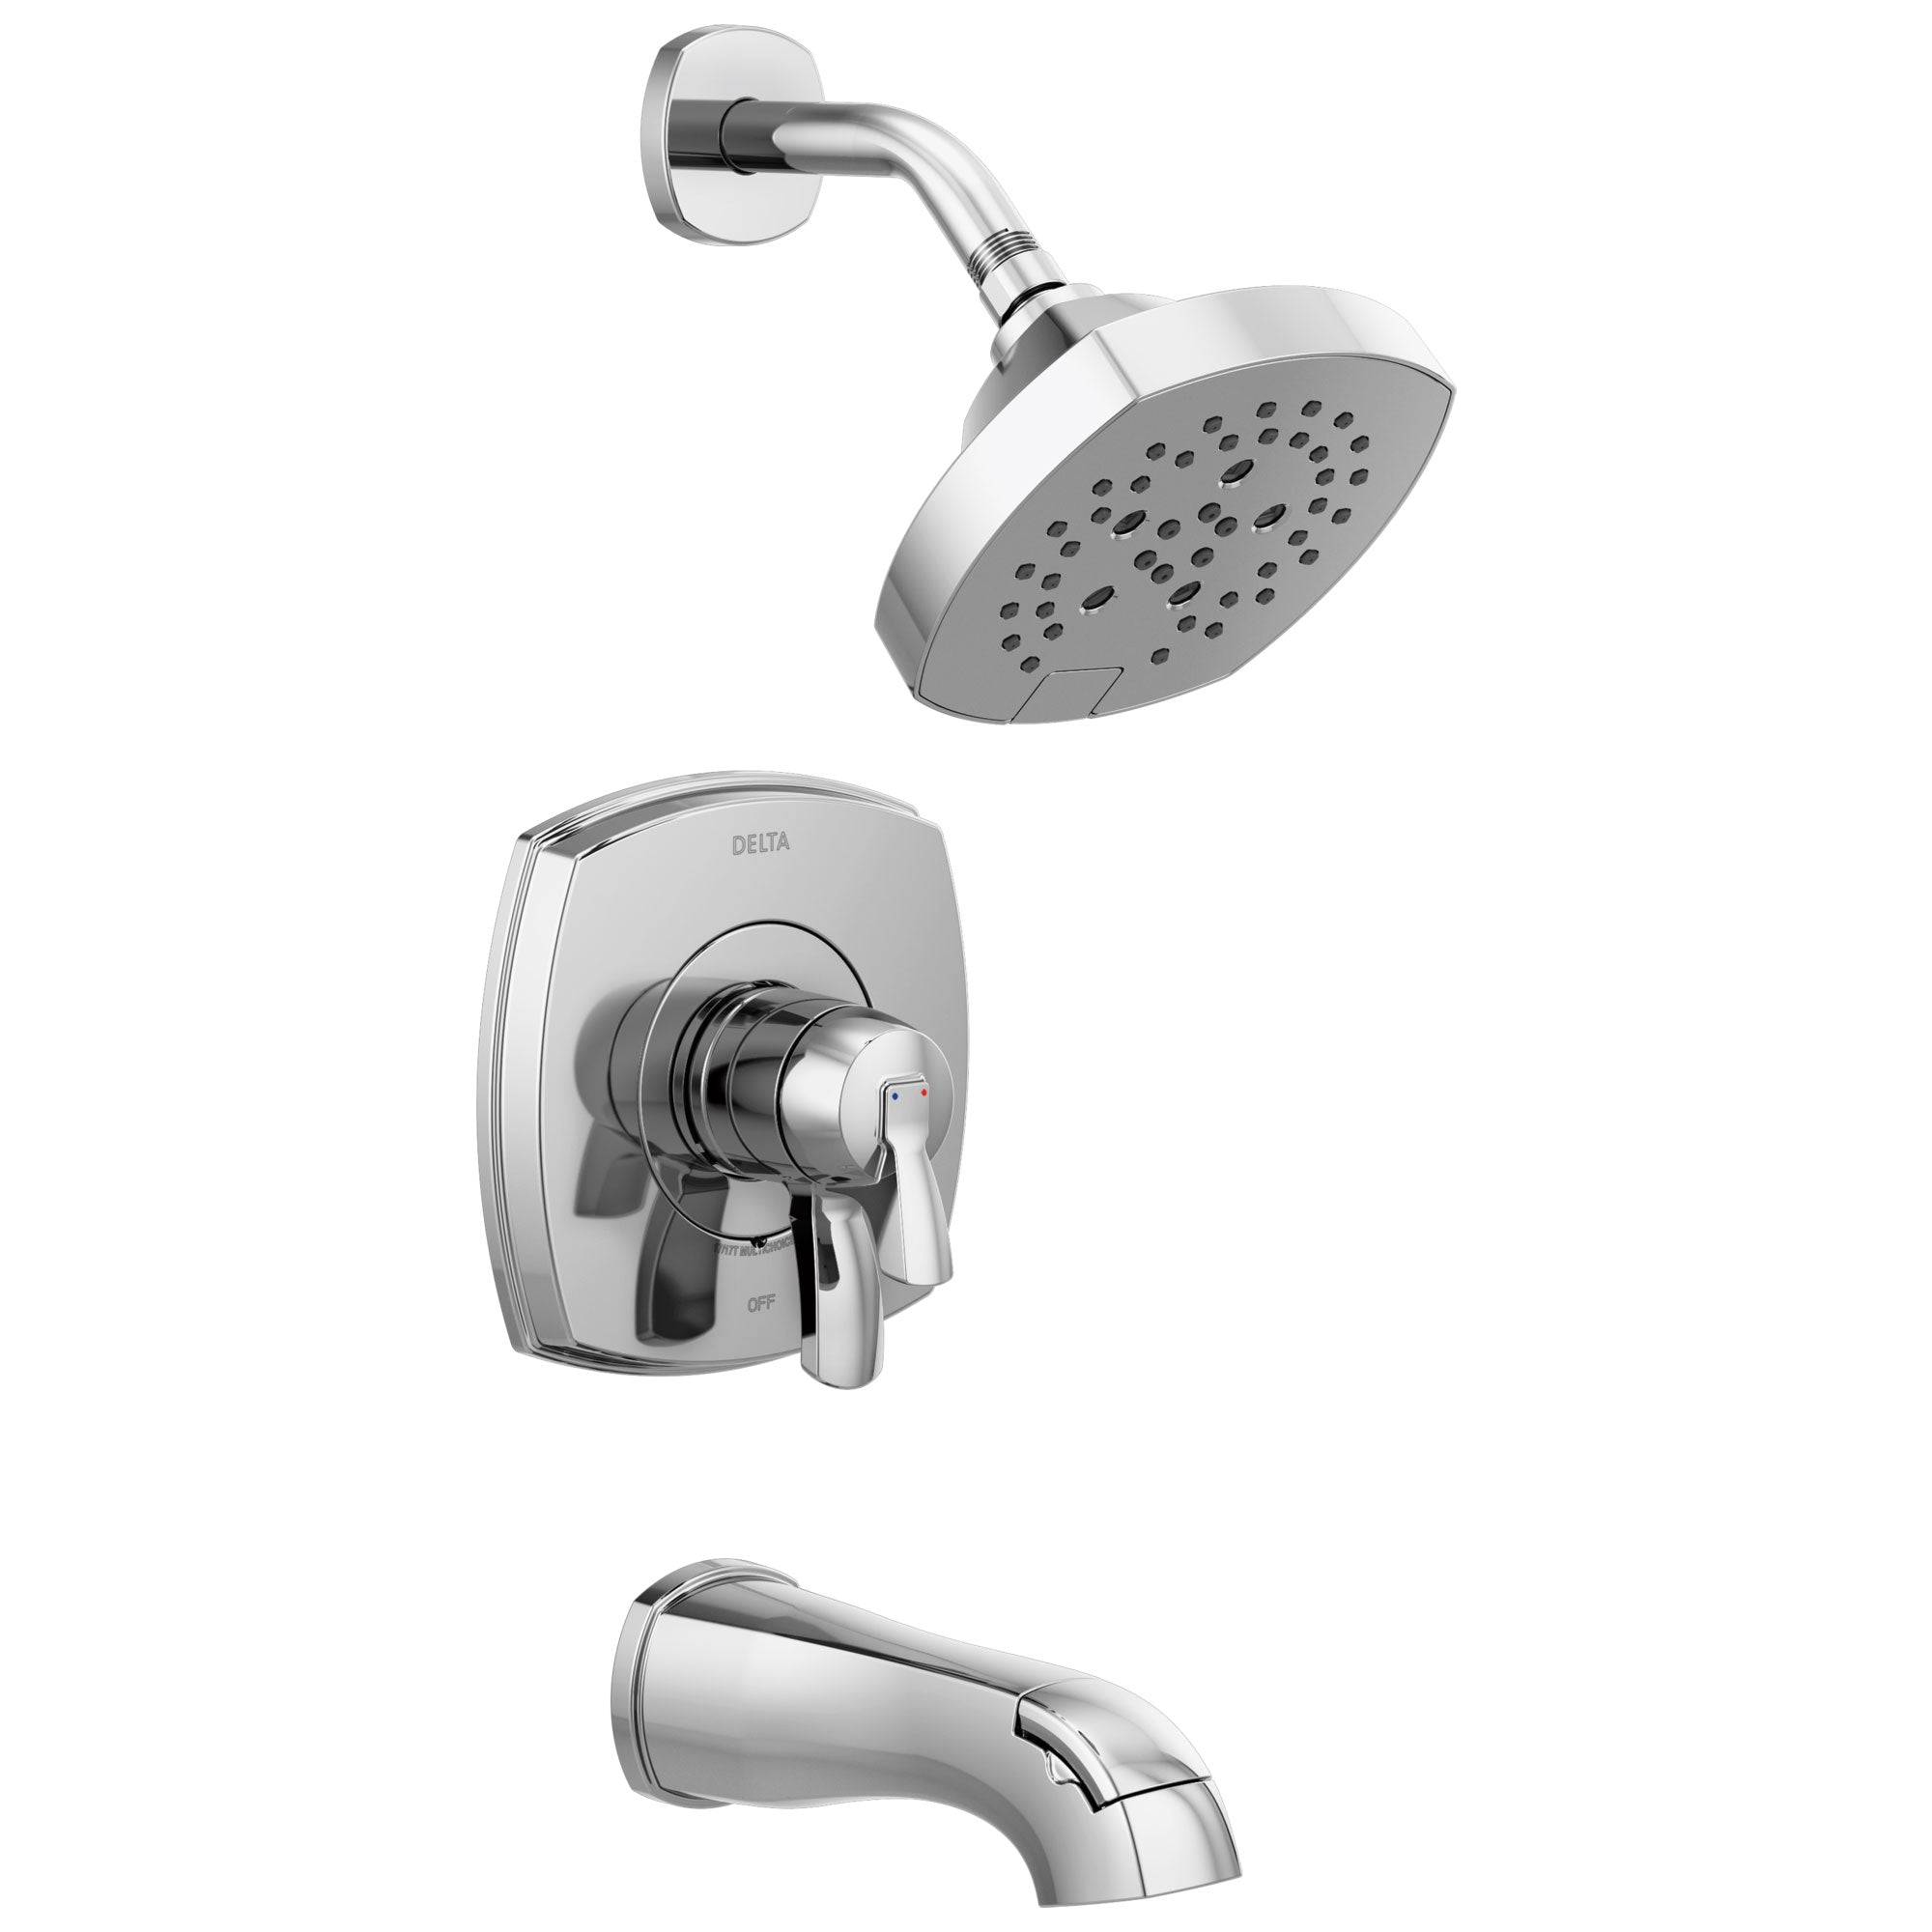 Delta Stryke Chrome Finish 17 Series Tub and Shower Combo Faucet Includes Handles, Cartridge, and Rough Valve with Stops D3336V